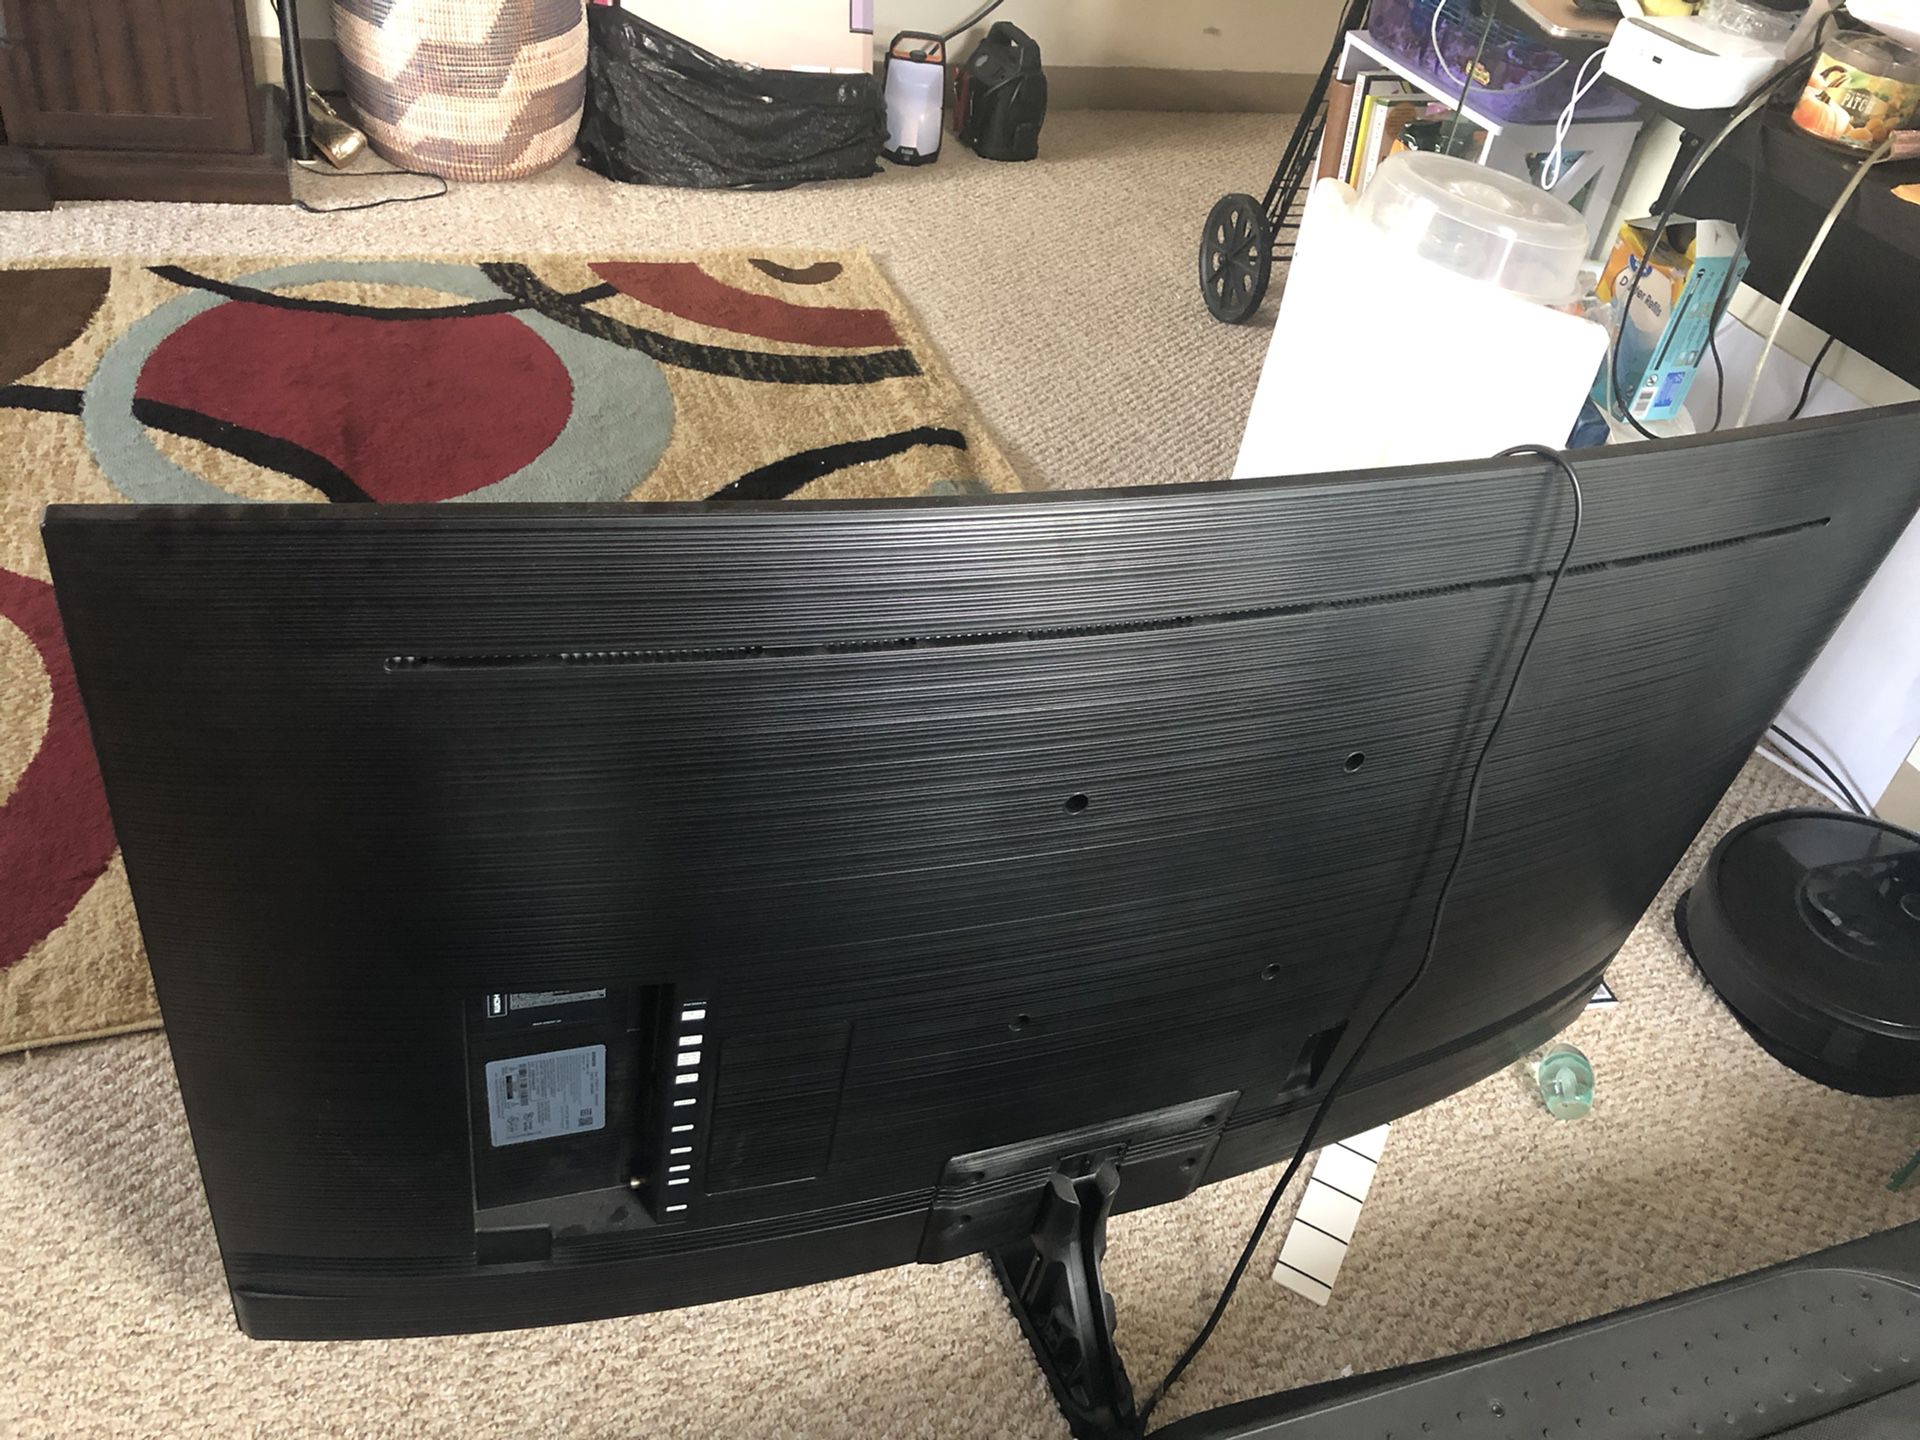 50 inch Samsung curved TV